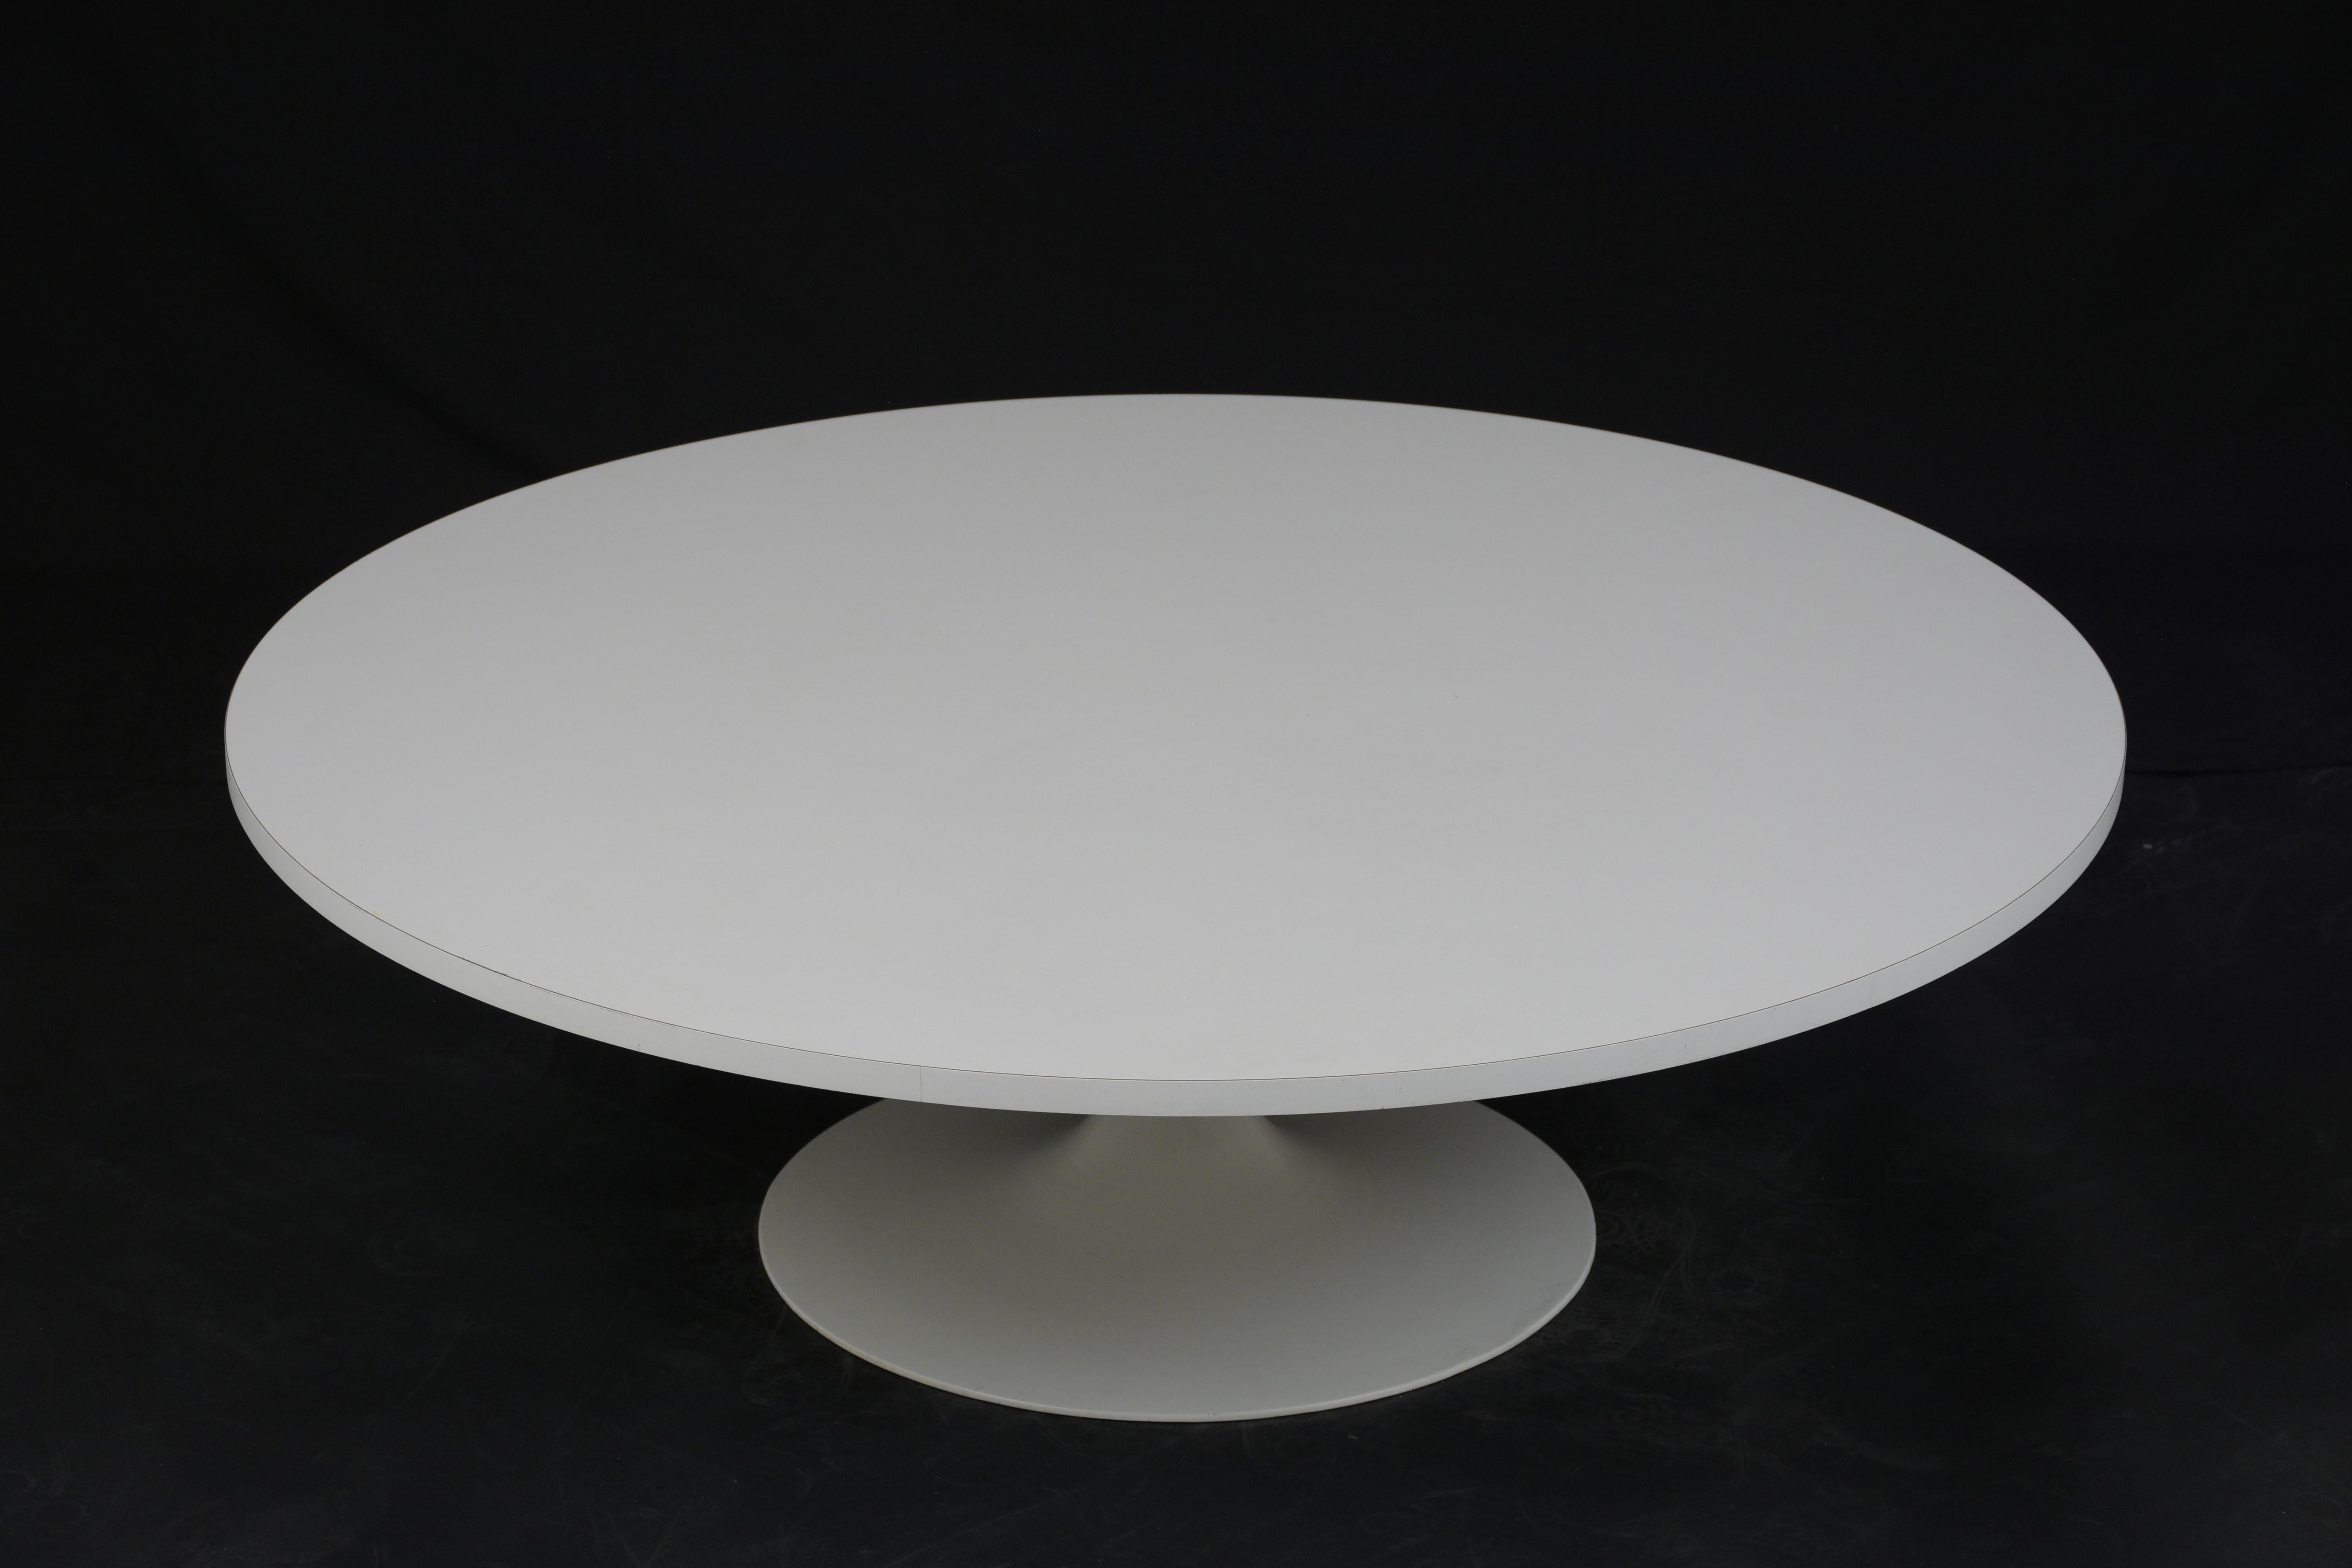 This 1960s Mid-Century Modern coffee table or cocktail table features a Formica covered wood top with a metal base. The table is finished in a Stark white color that will stand out in any room. This coffee table is sturdy, sleek, and ready to be